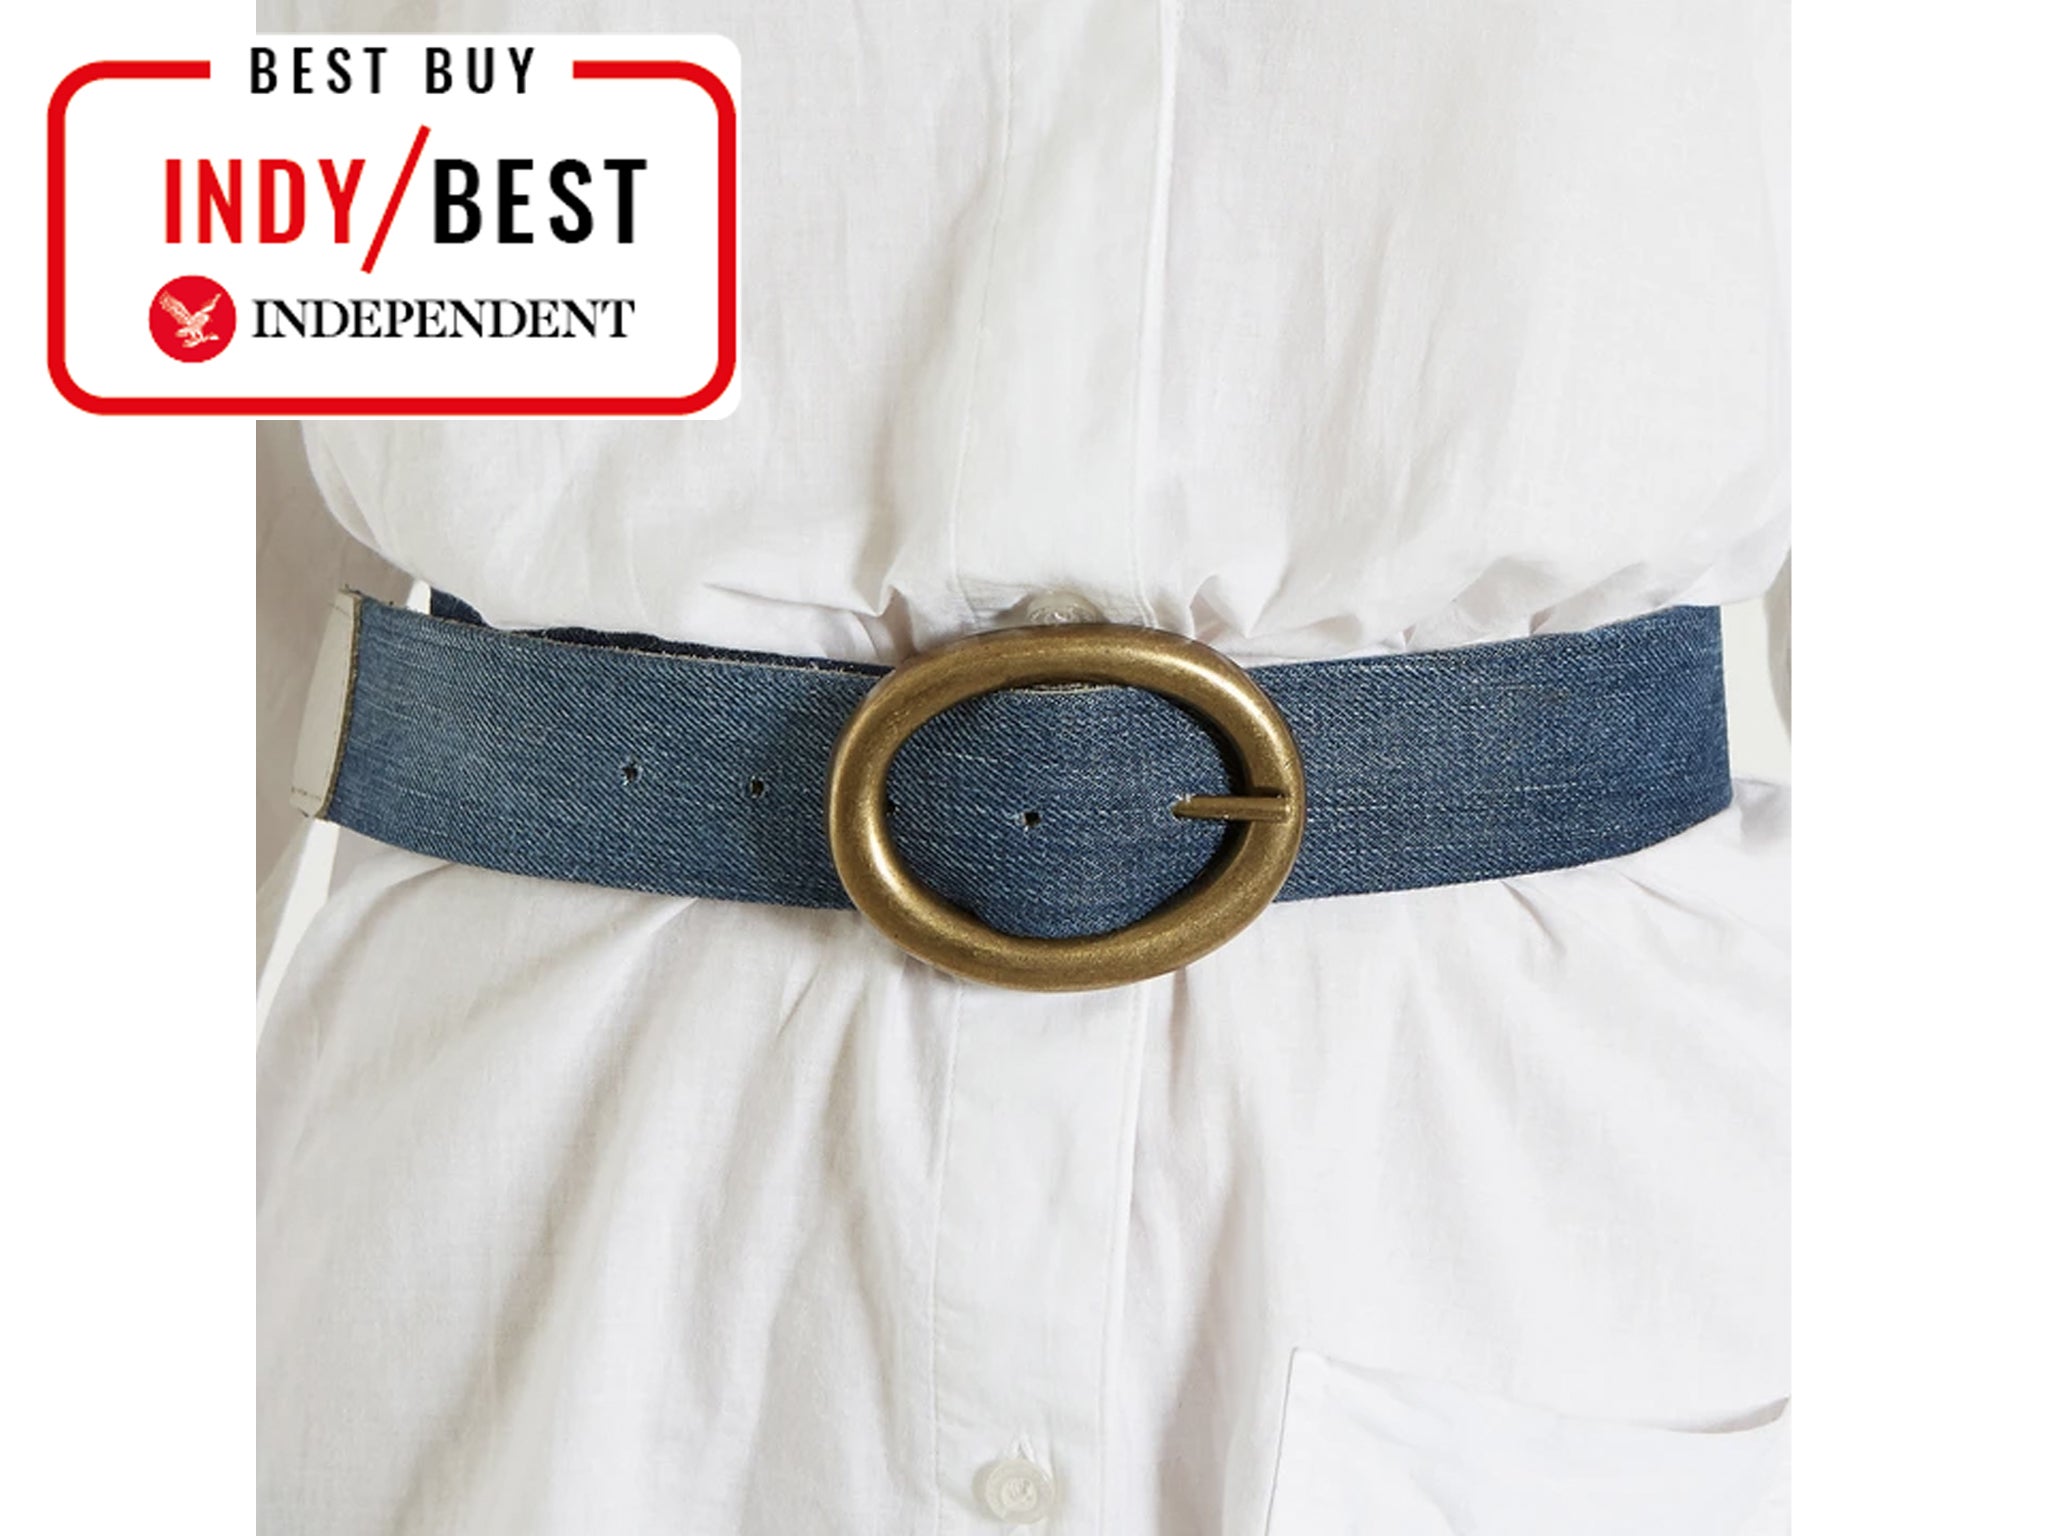 Oyfel Womens Belt Thin Belts for Women Girls Ladies PU Waist Band for Jeans Dresses Pants Stylish Accessories